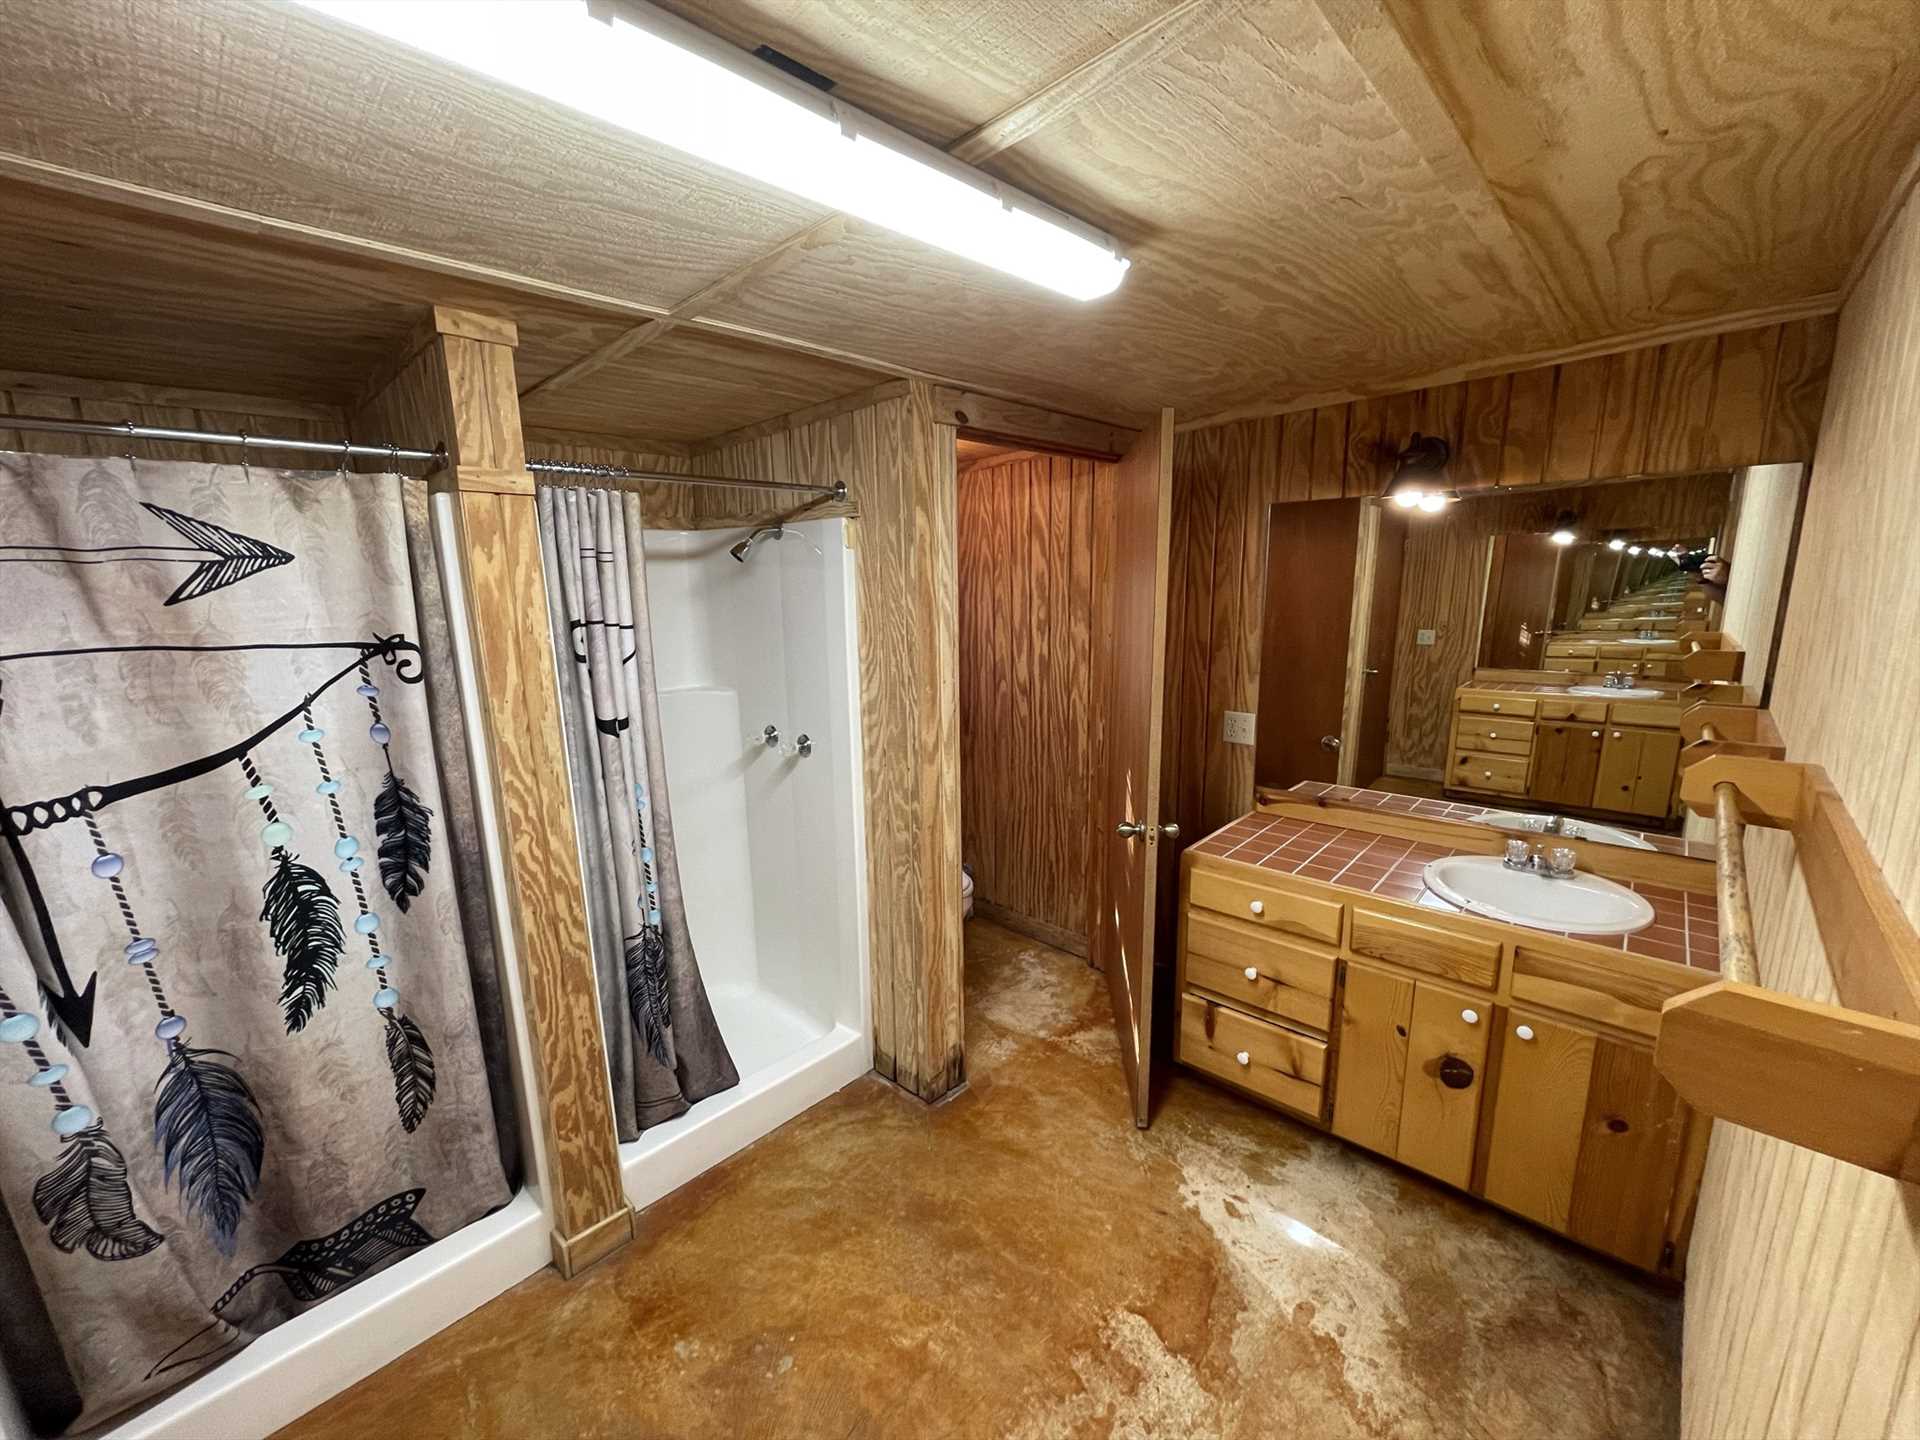                                                 Both bunkhouses feature fully functional baths, and each is equipped with two shower stalls.